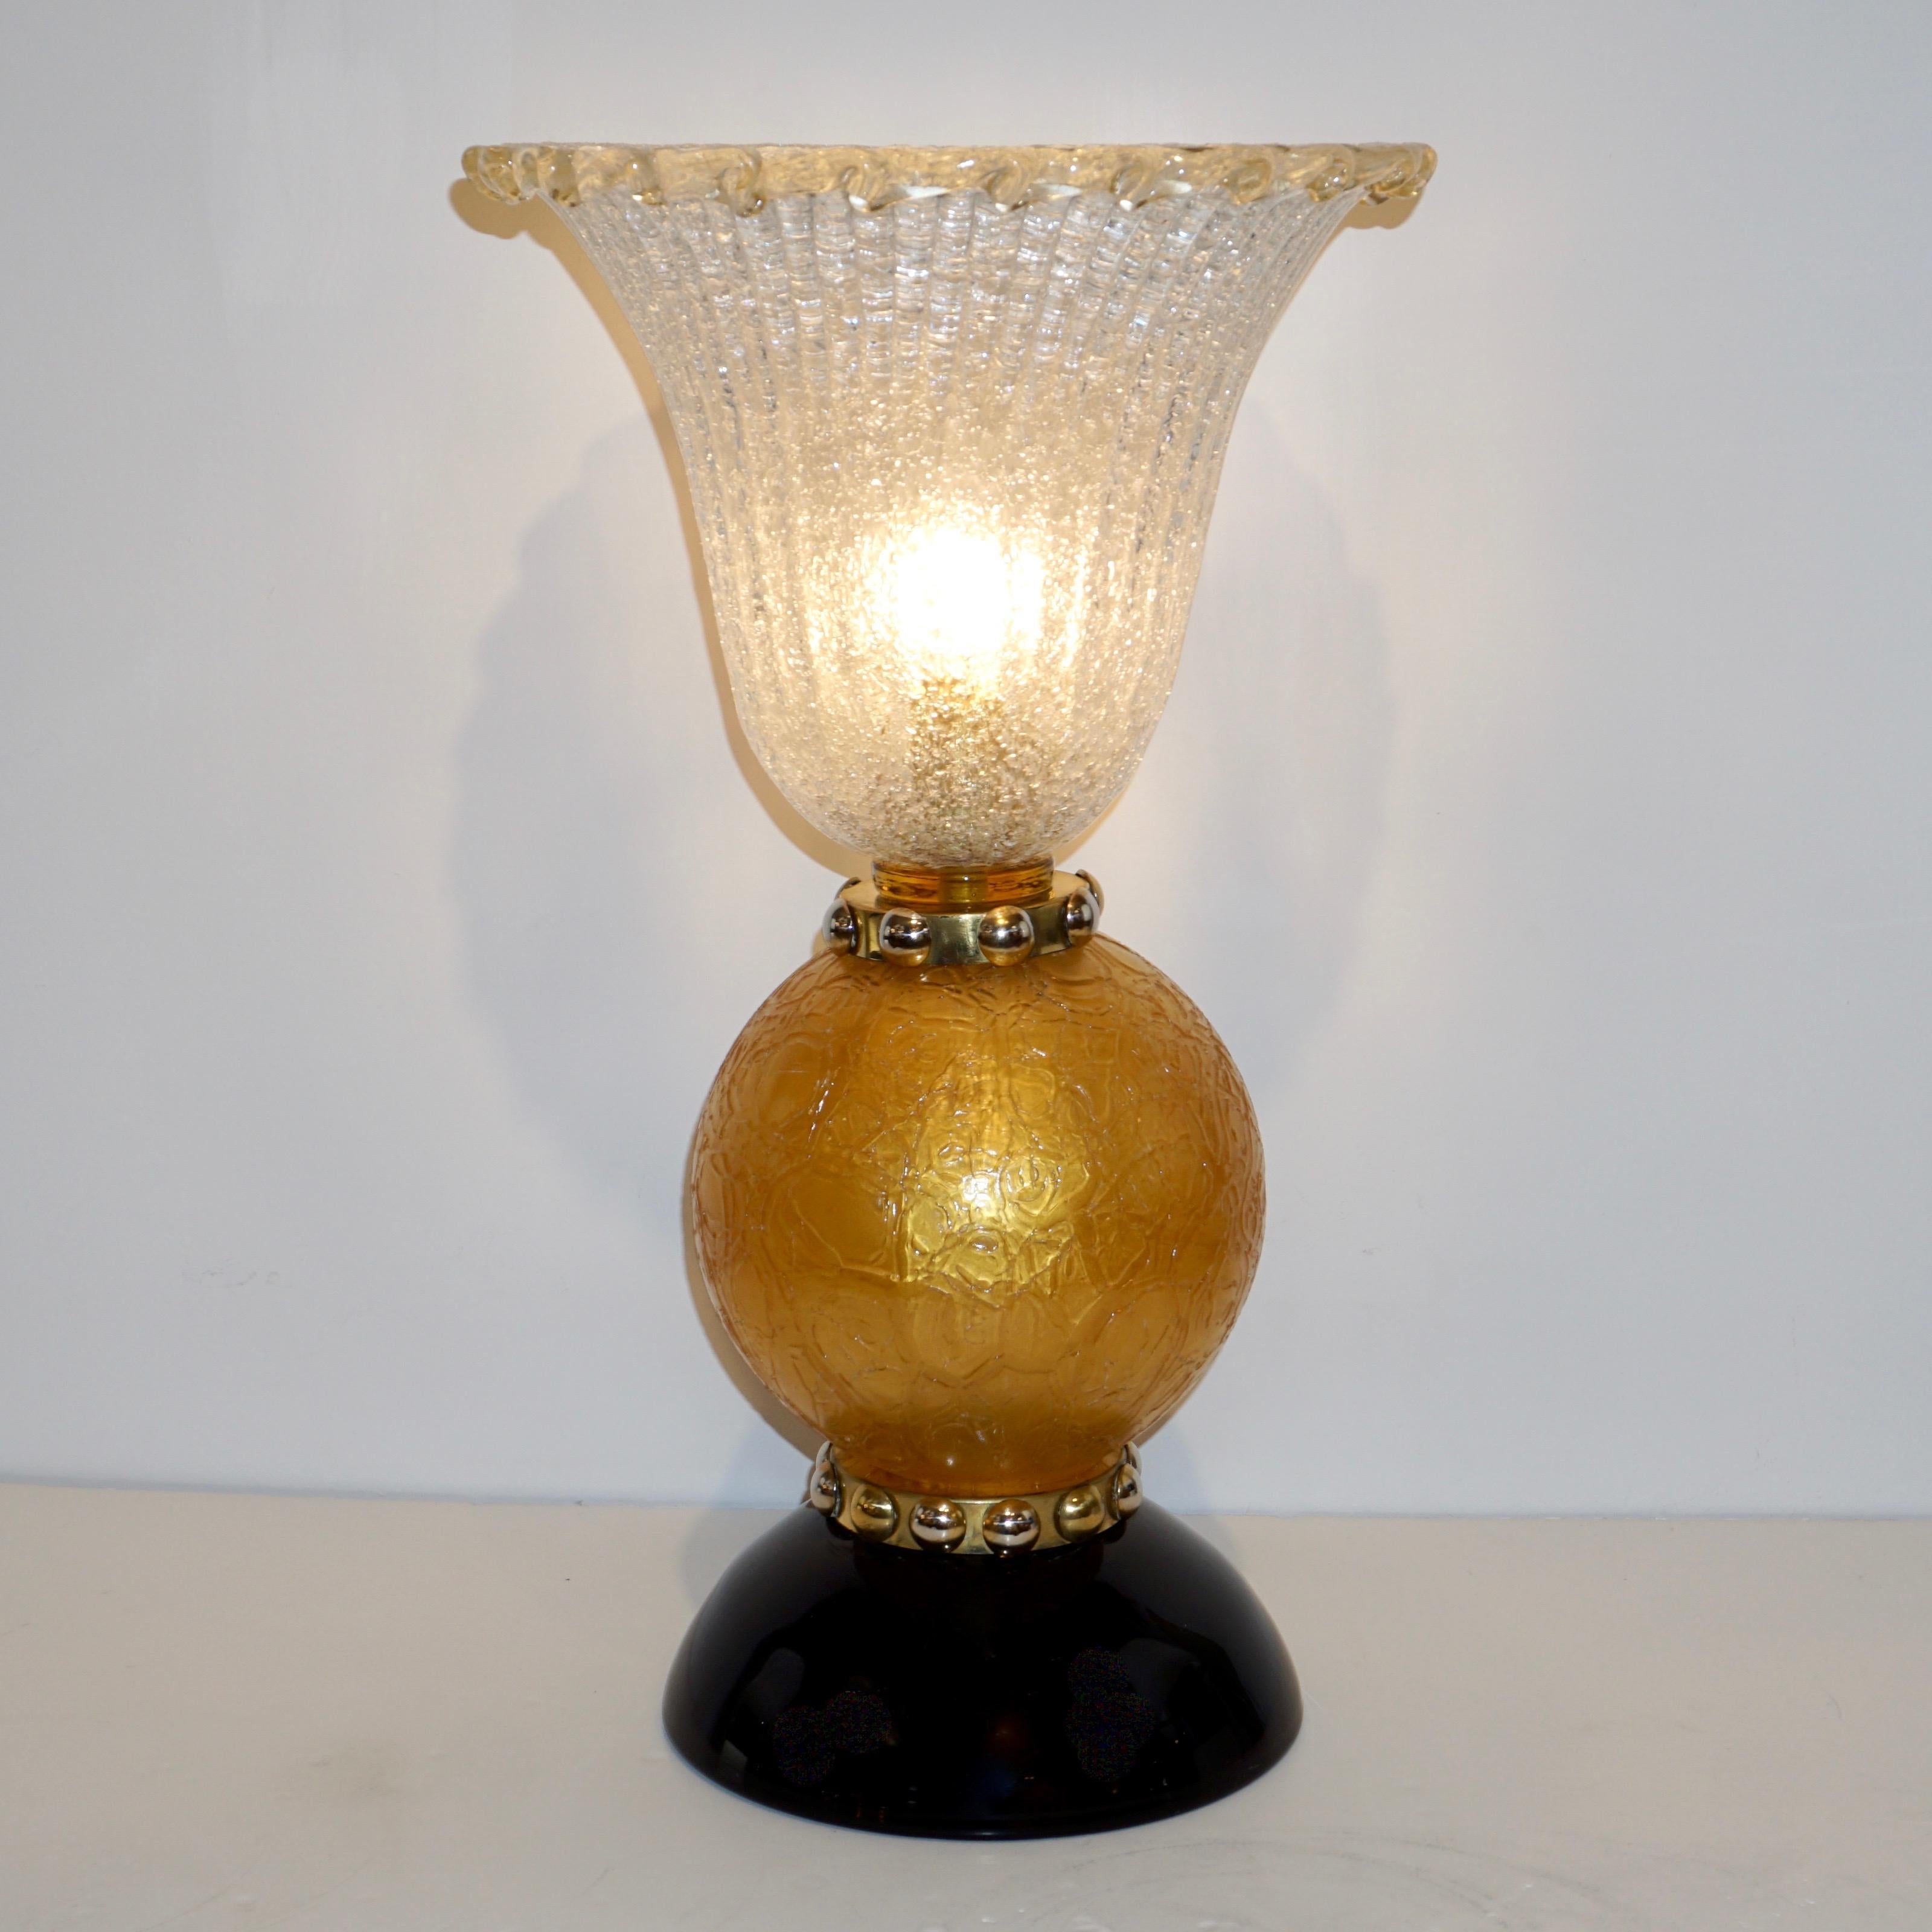 Italian Art Deco Style Gold Black Lamps with Barovier Crystal Murano Glass Shade 1